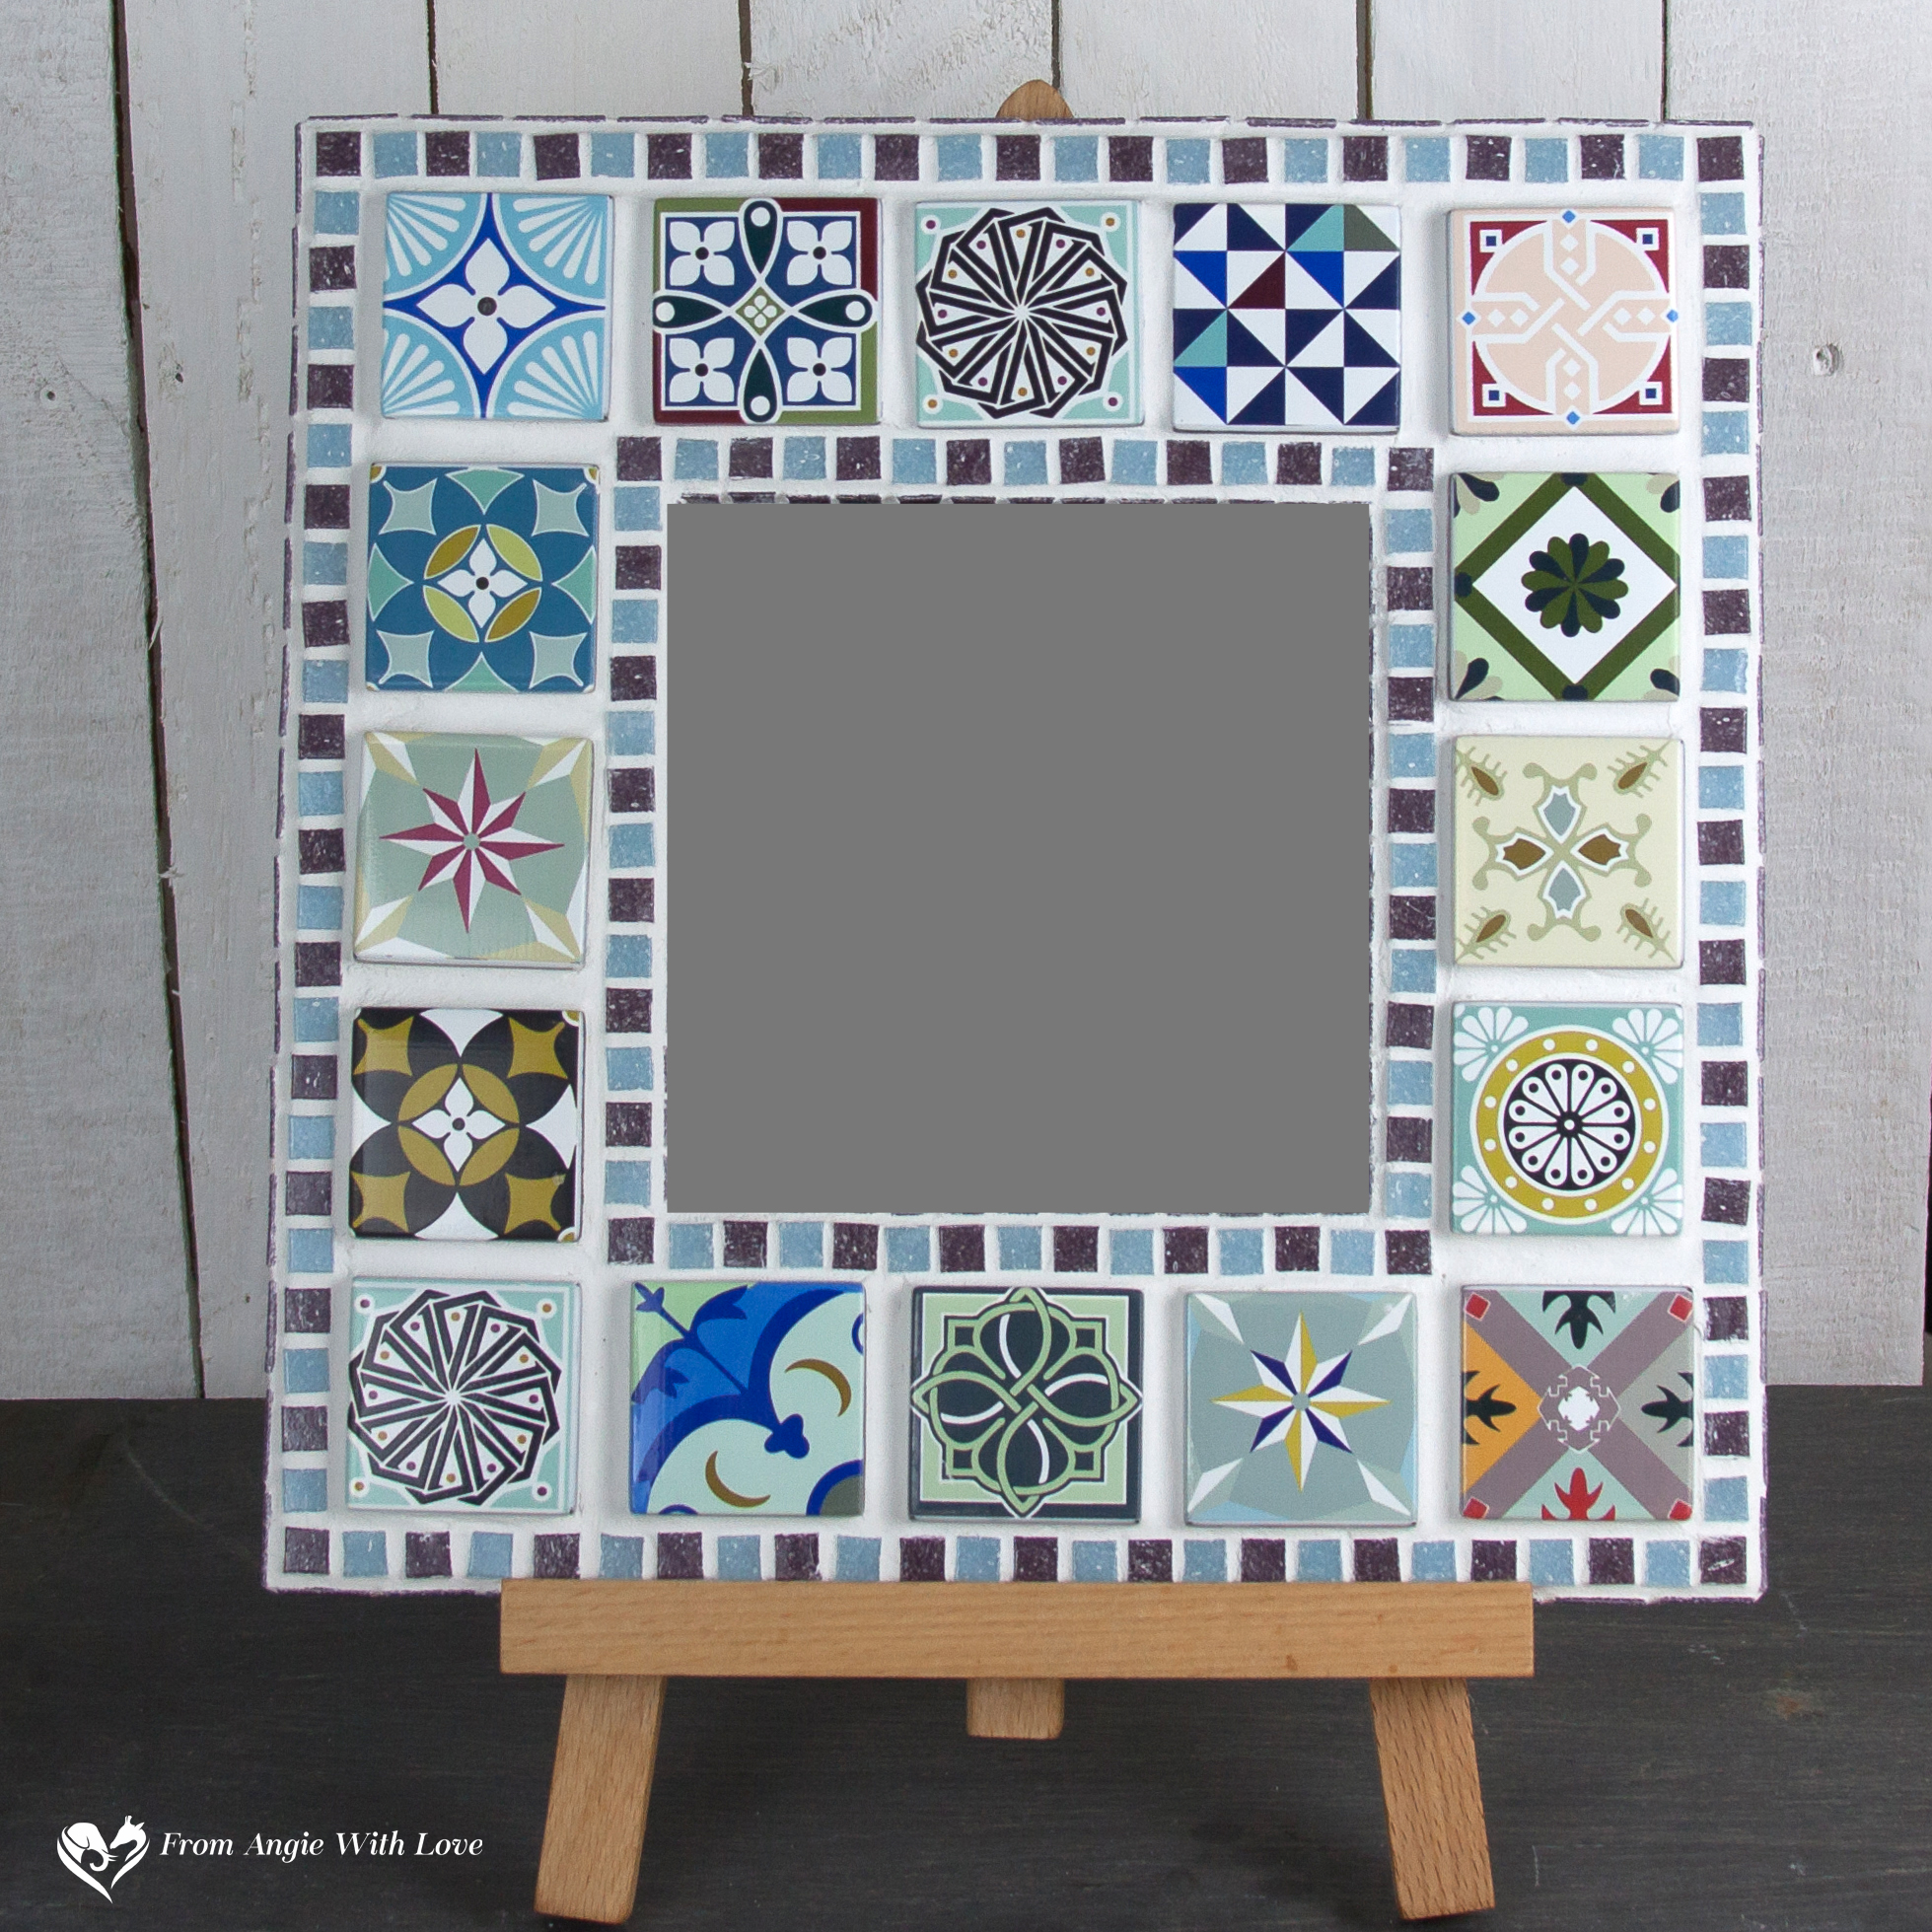 Hand-decorated mosaic mirror with Moroccan-style tiles